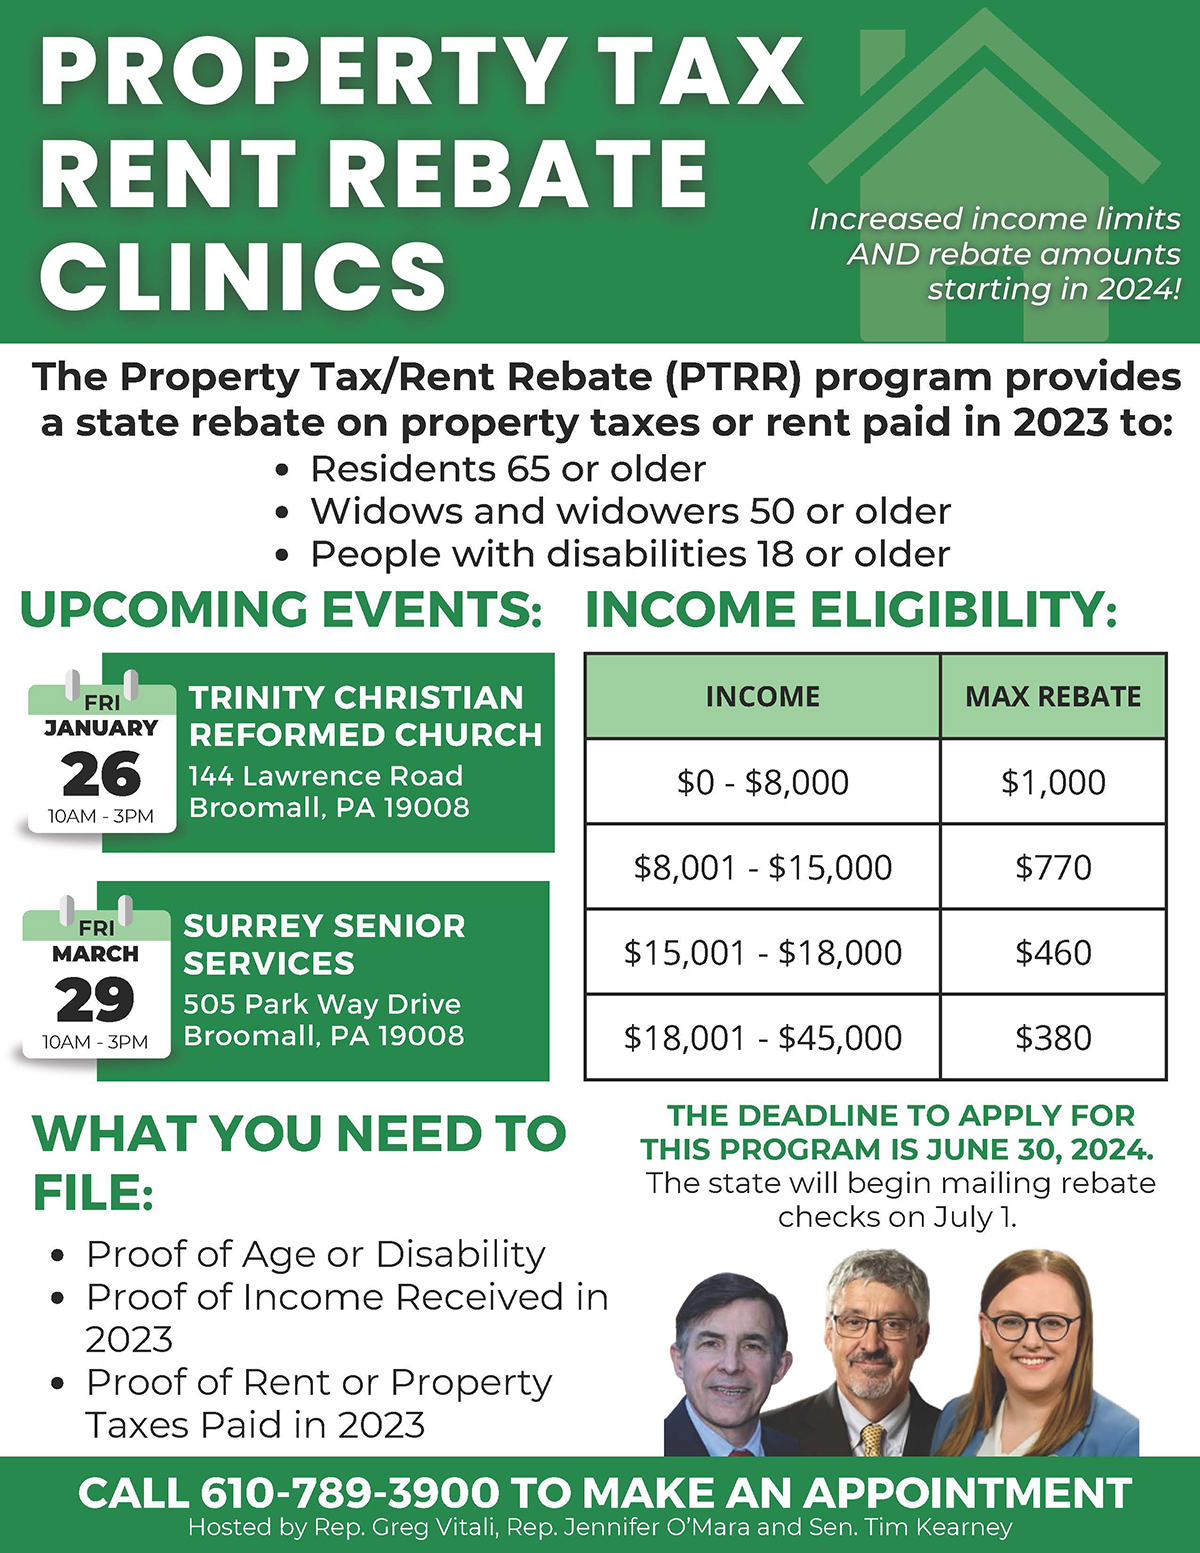 Property Tax/Rent Rebate Clinics - January 26, 2024 and March 29, 2024